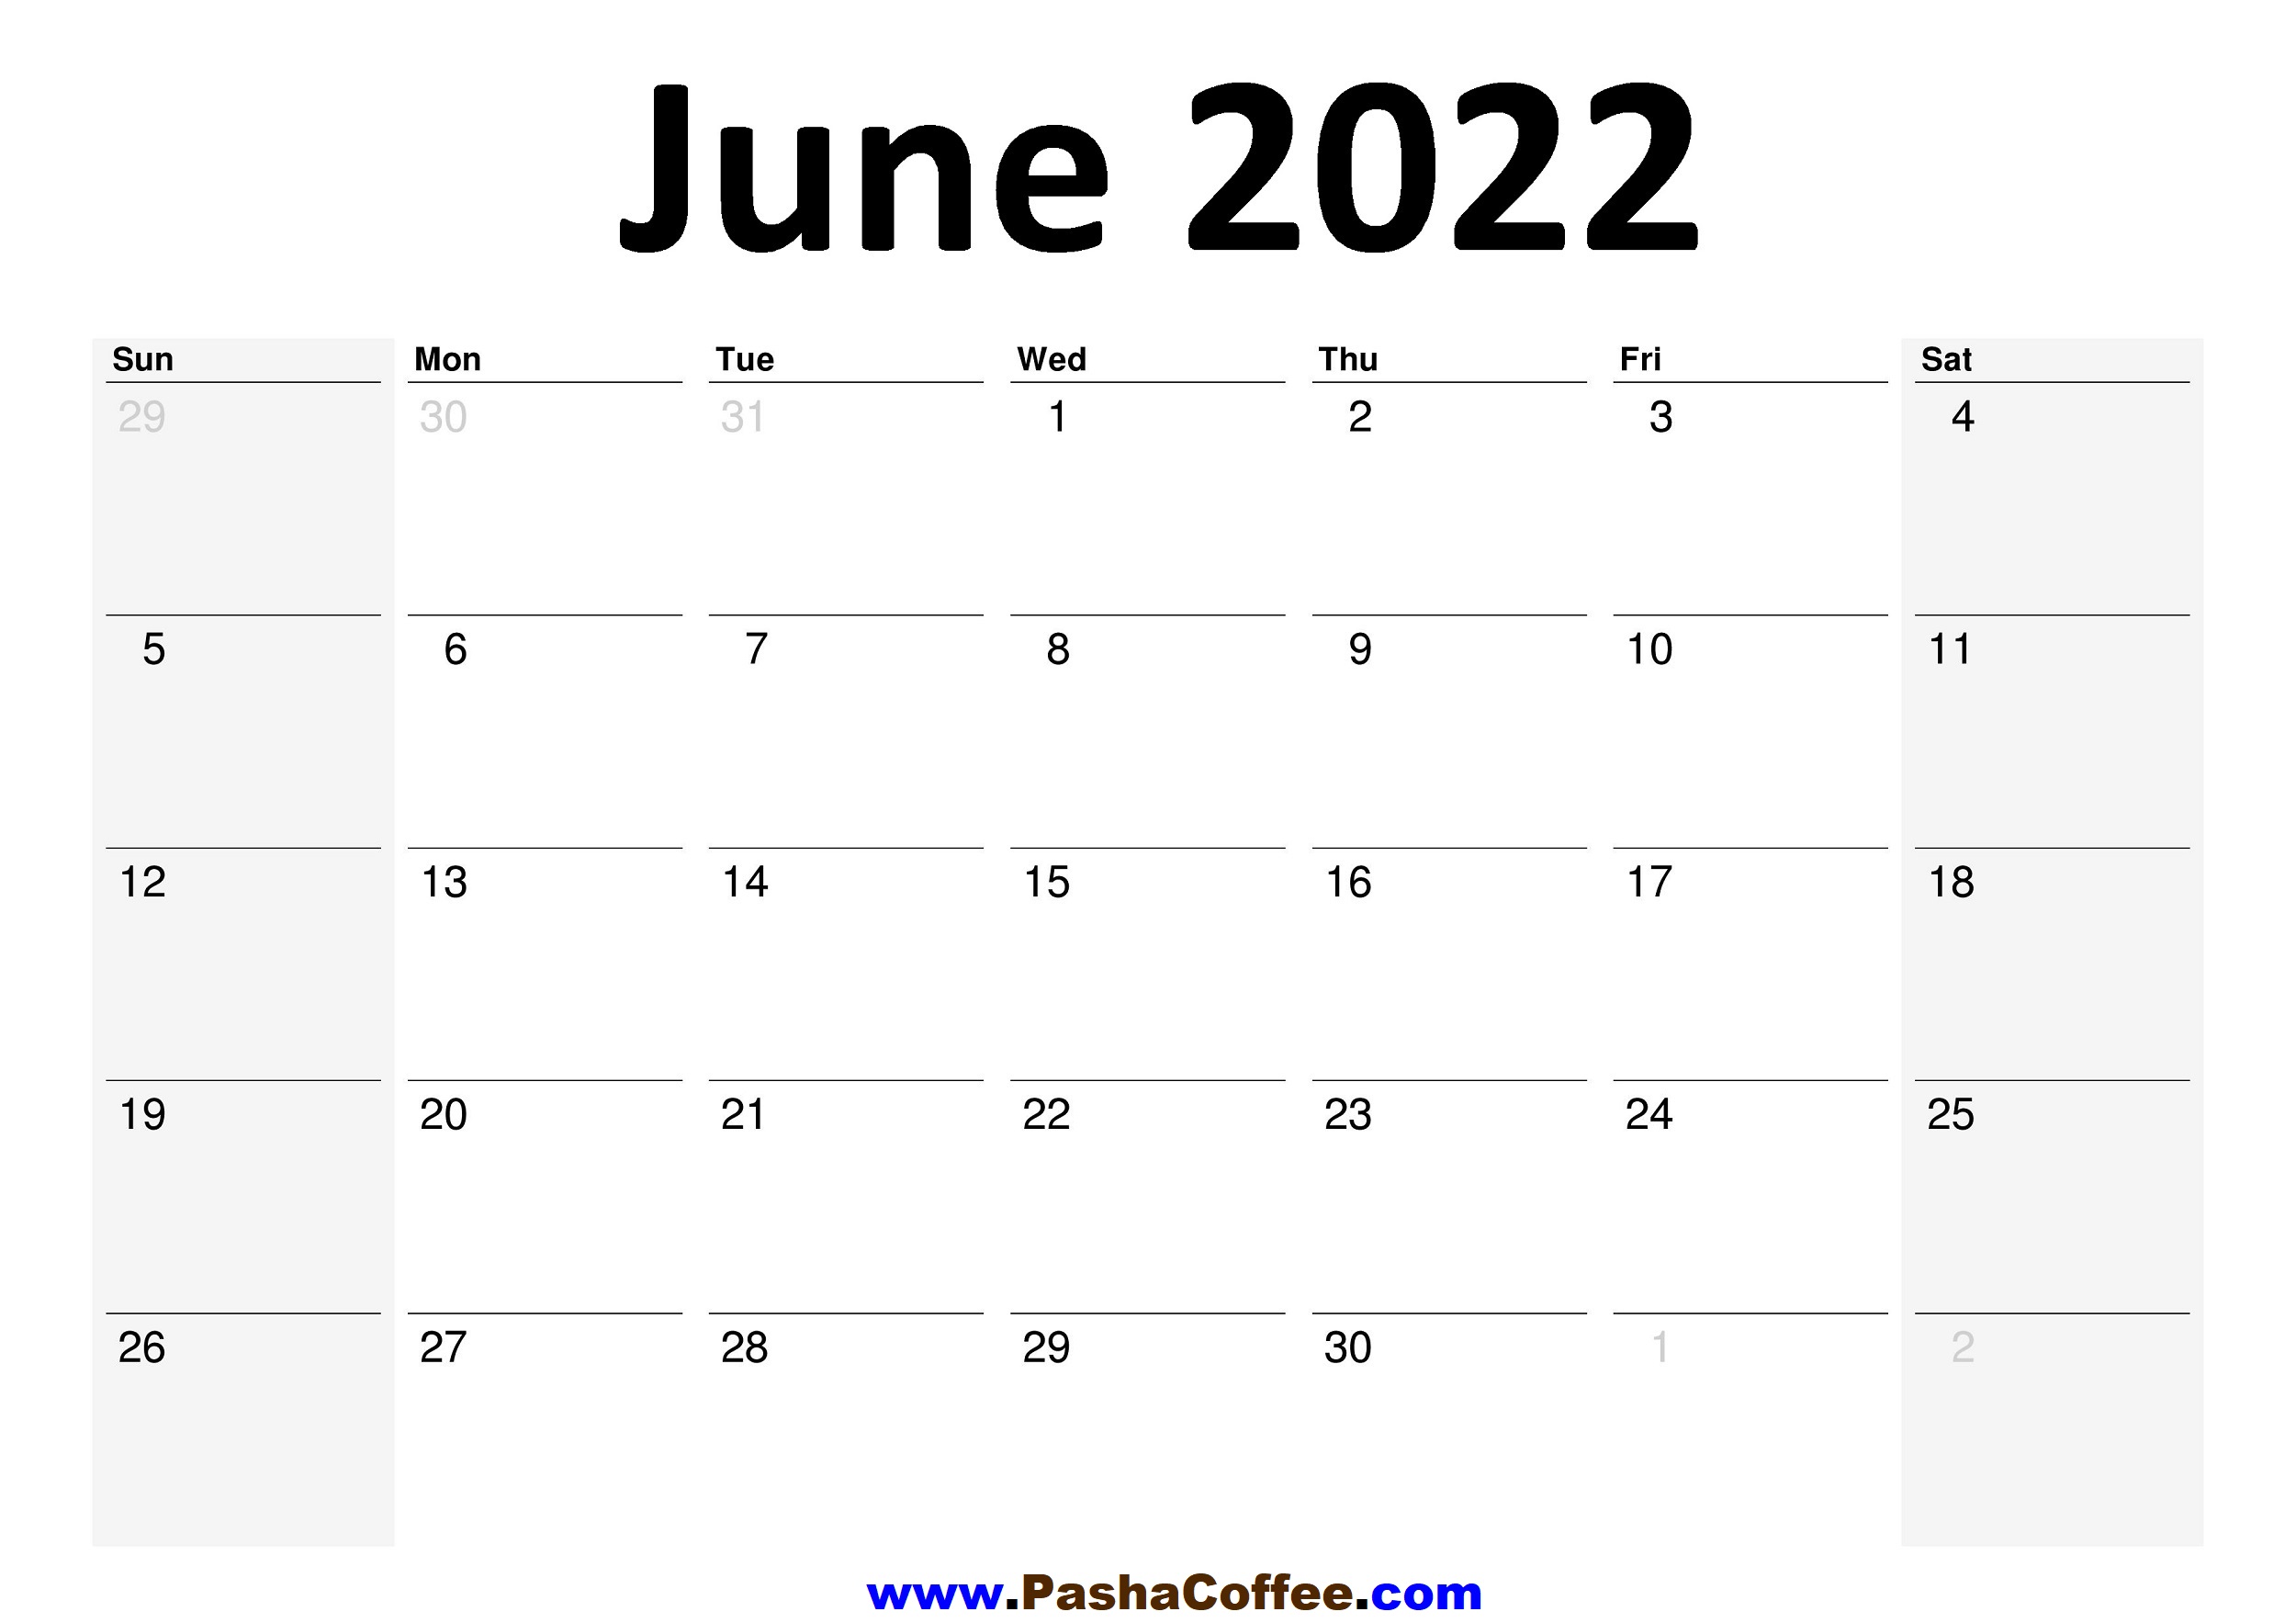 June And July Calendar 2022 2022 June Calendar Planner Printable Monthly – Pashacoffee.com